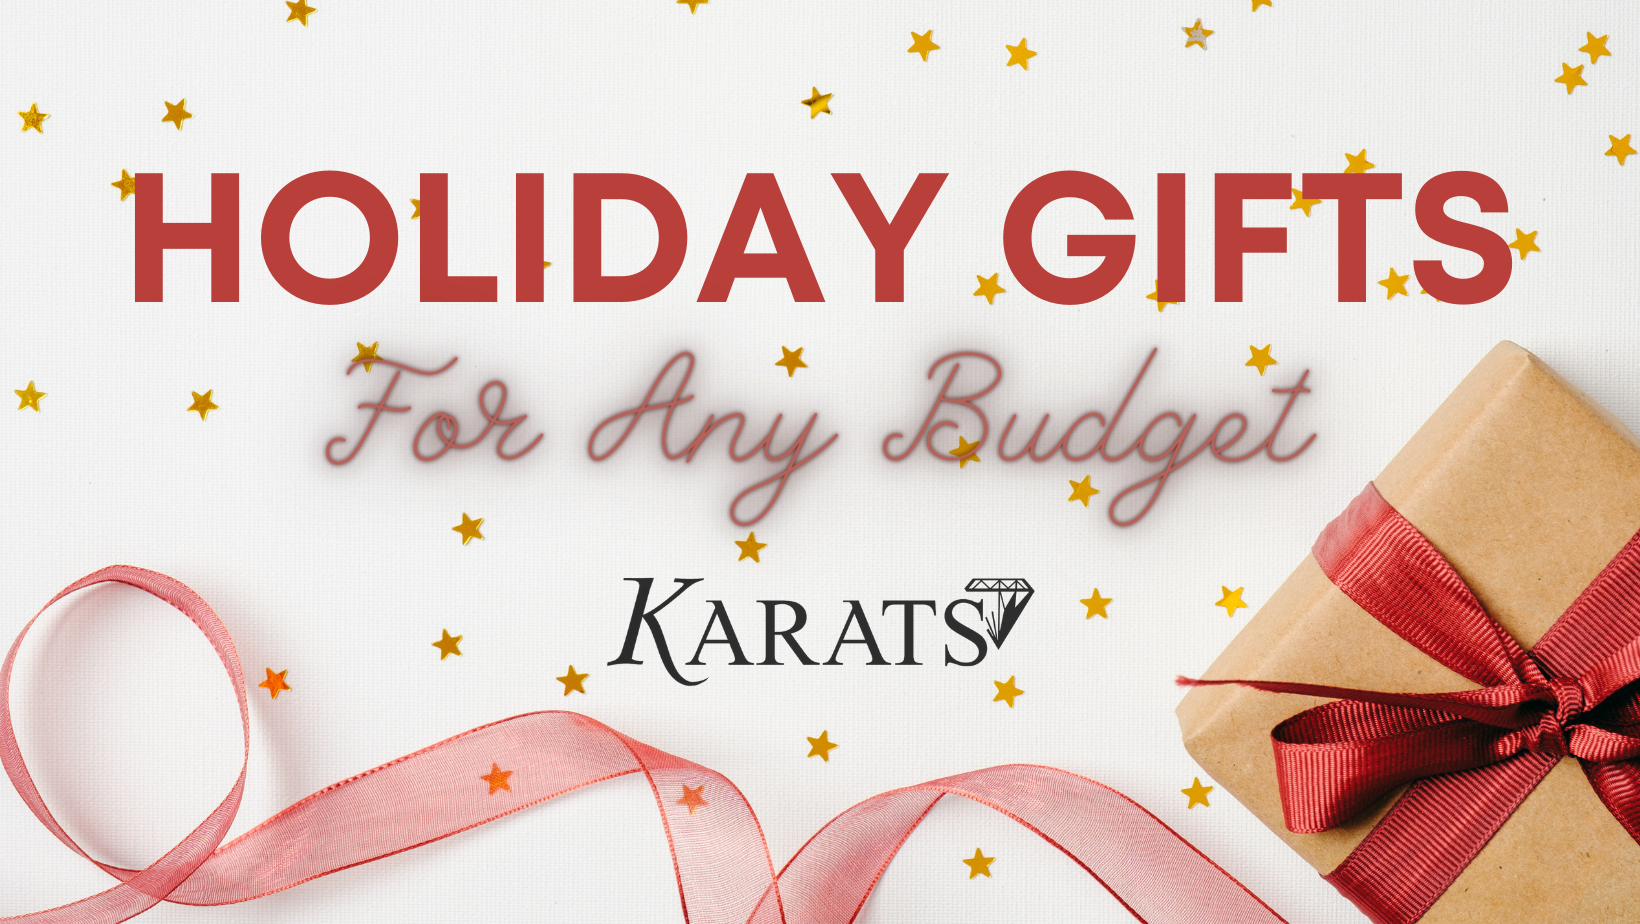 Holiday gifts for any budget